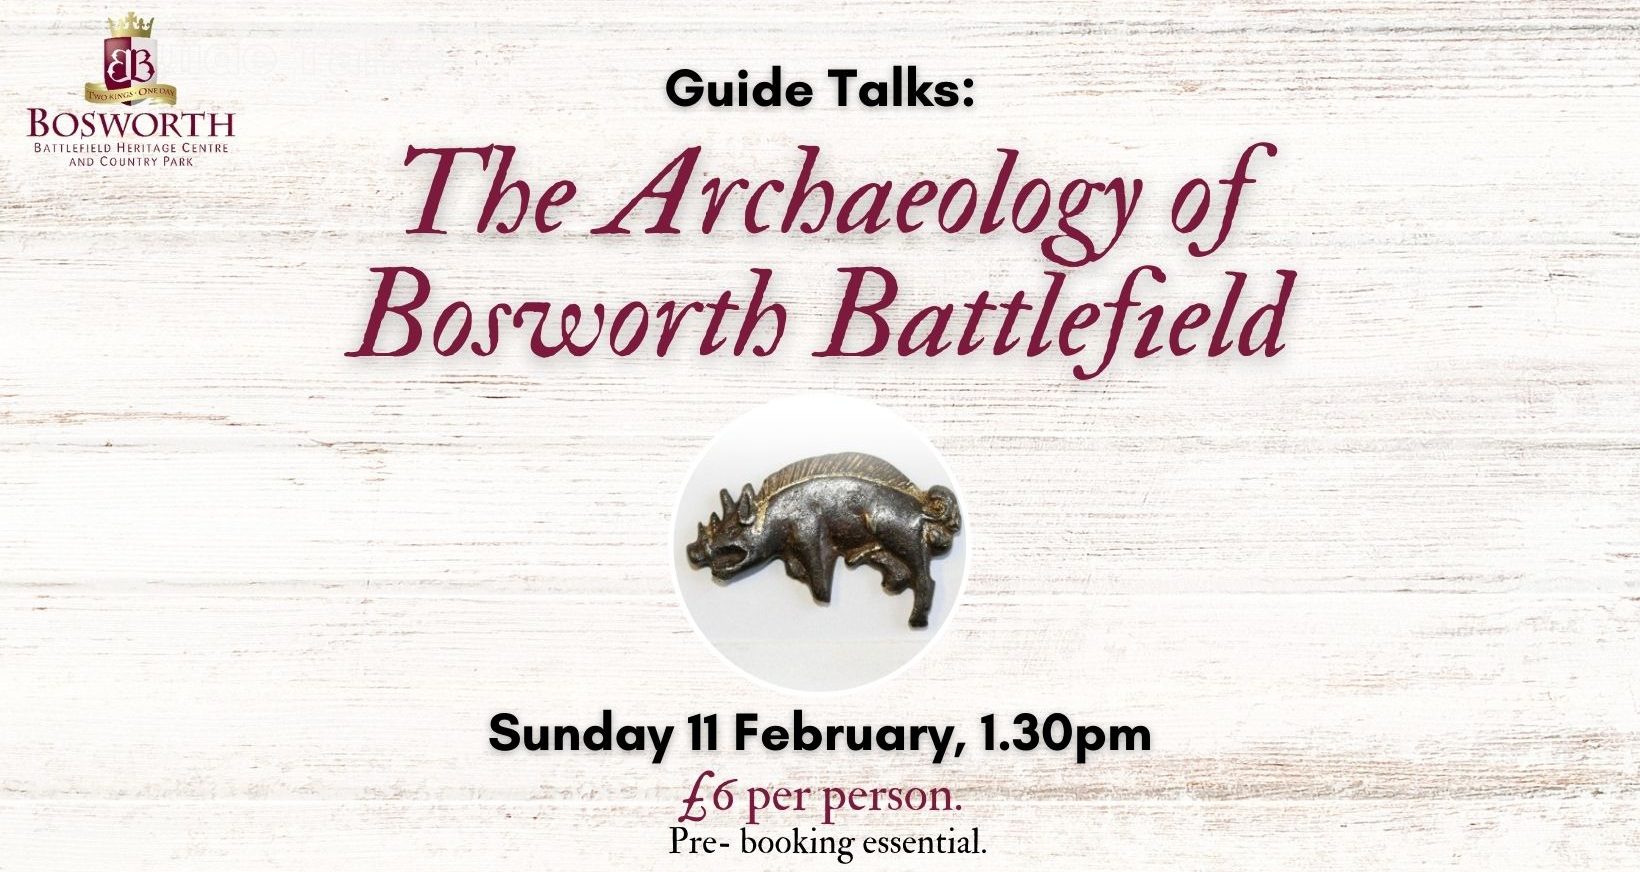 The Archaeology of Bosworth Battlefield